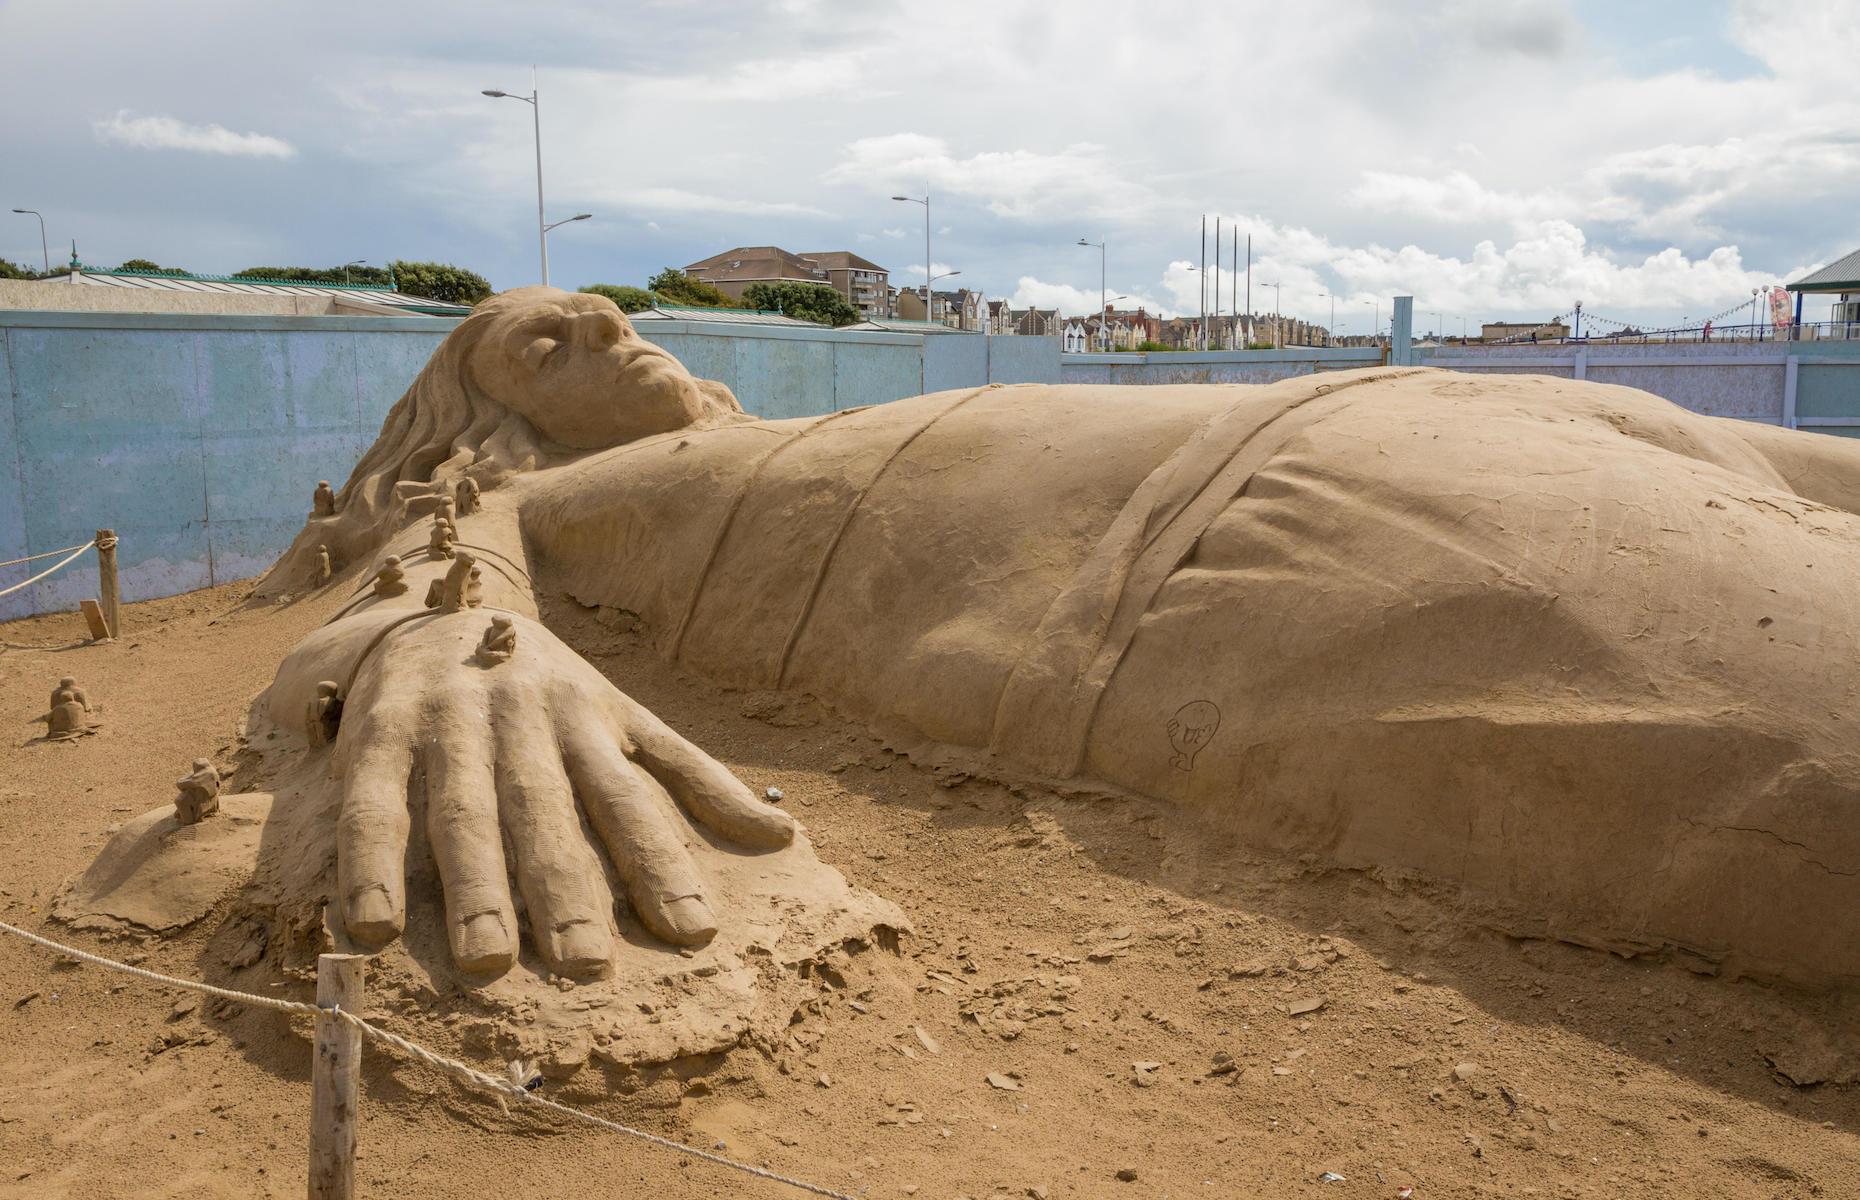 <p>Around 5,000 tons of beach sand were used by 20 international artists who gathered at the Somerset beach to create sculptures based around a theme of Once Upon a Time at the 2014 Weston-super-Mare Sand Sculpture Festival. Pictured here is a giant Gulliver and the Lilliputians from Jonathan Swift’s <em>Gulliver’s Travels</em> – it was one of the largest displays at the festival and was the work of Radovan Zivny from the Czech Republic.</p>